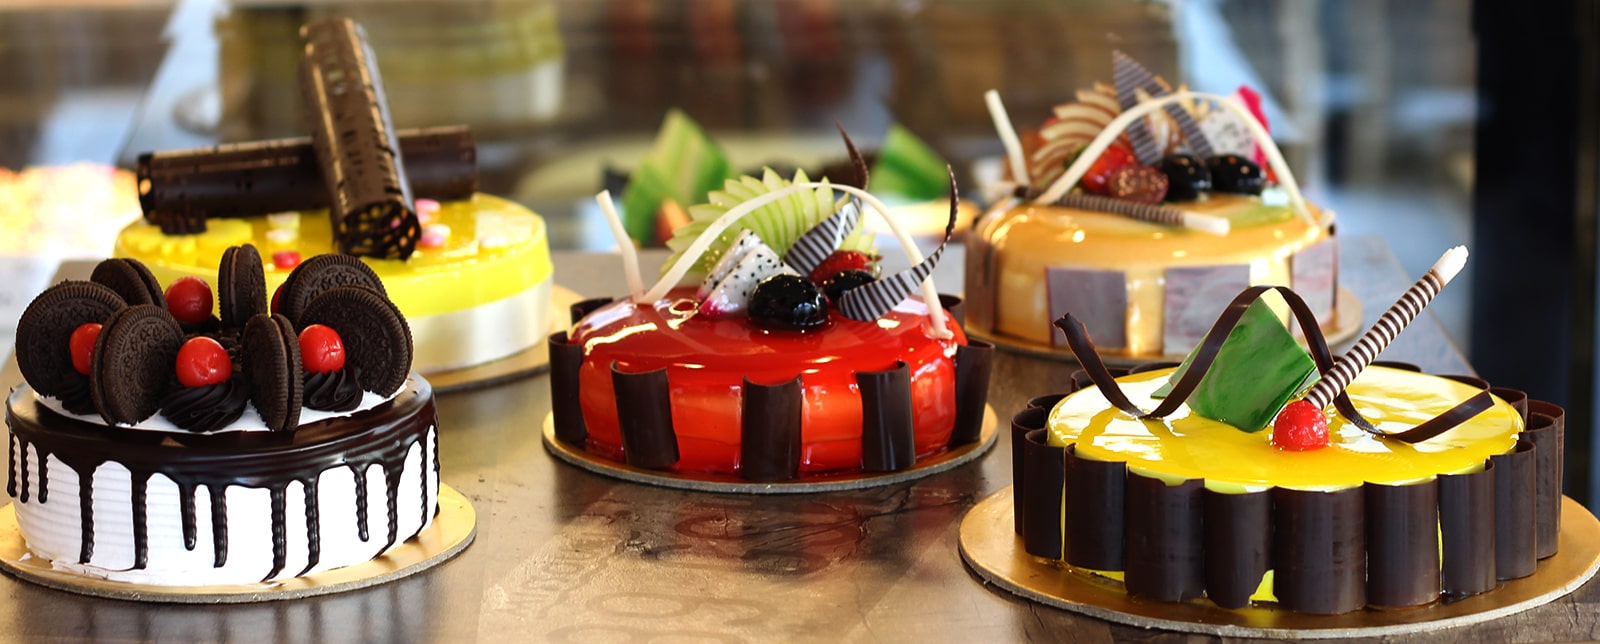 Free Online Cake Delivery in Gurgaon -Upto 300₹ OFF| FNP